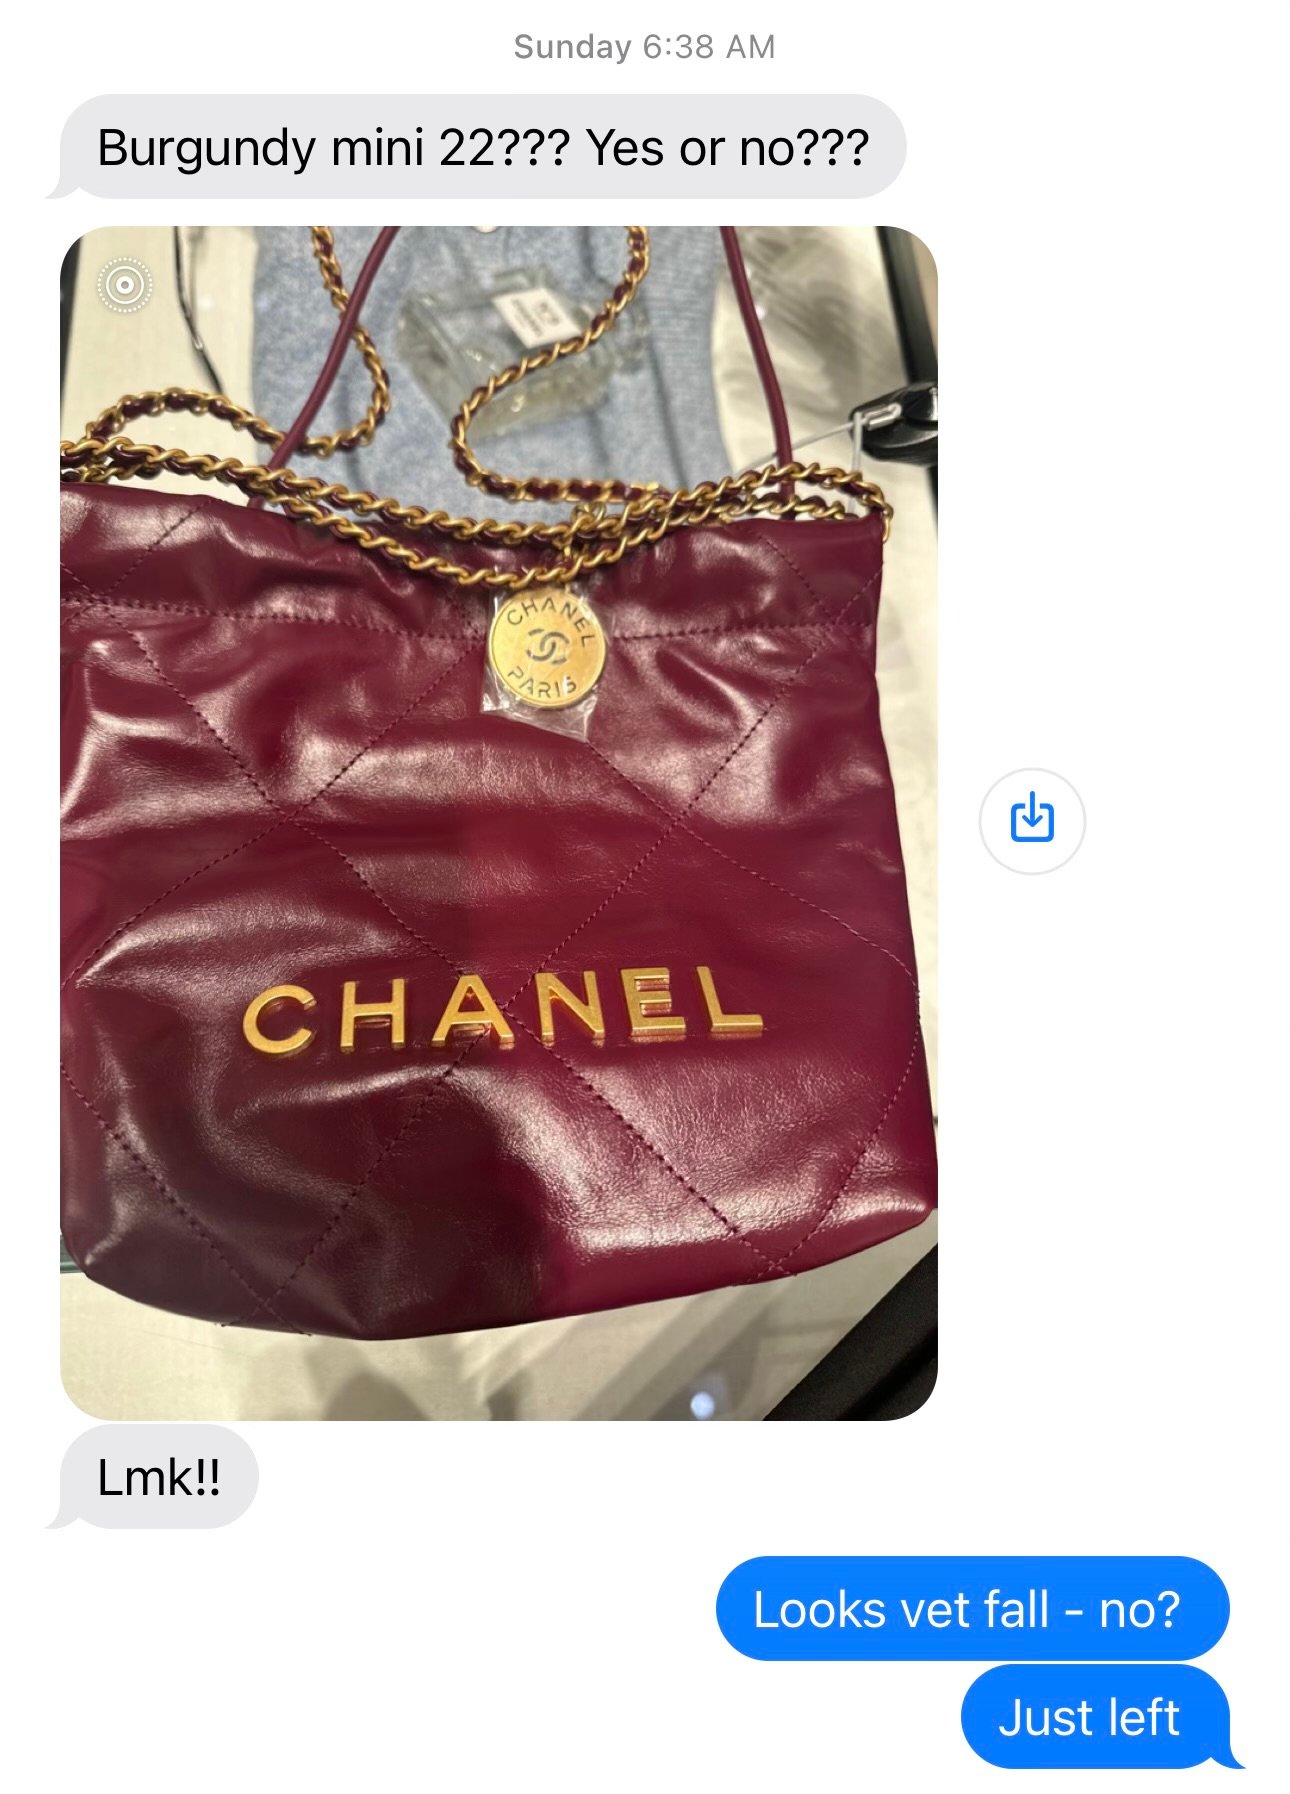 Chanel 22 Hand Bag, Review & Recommendation